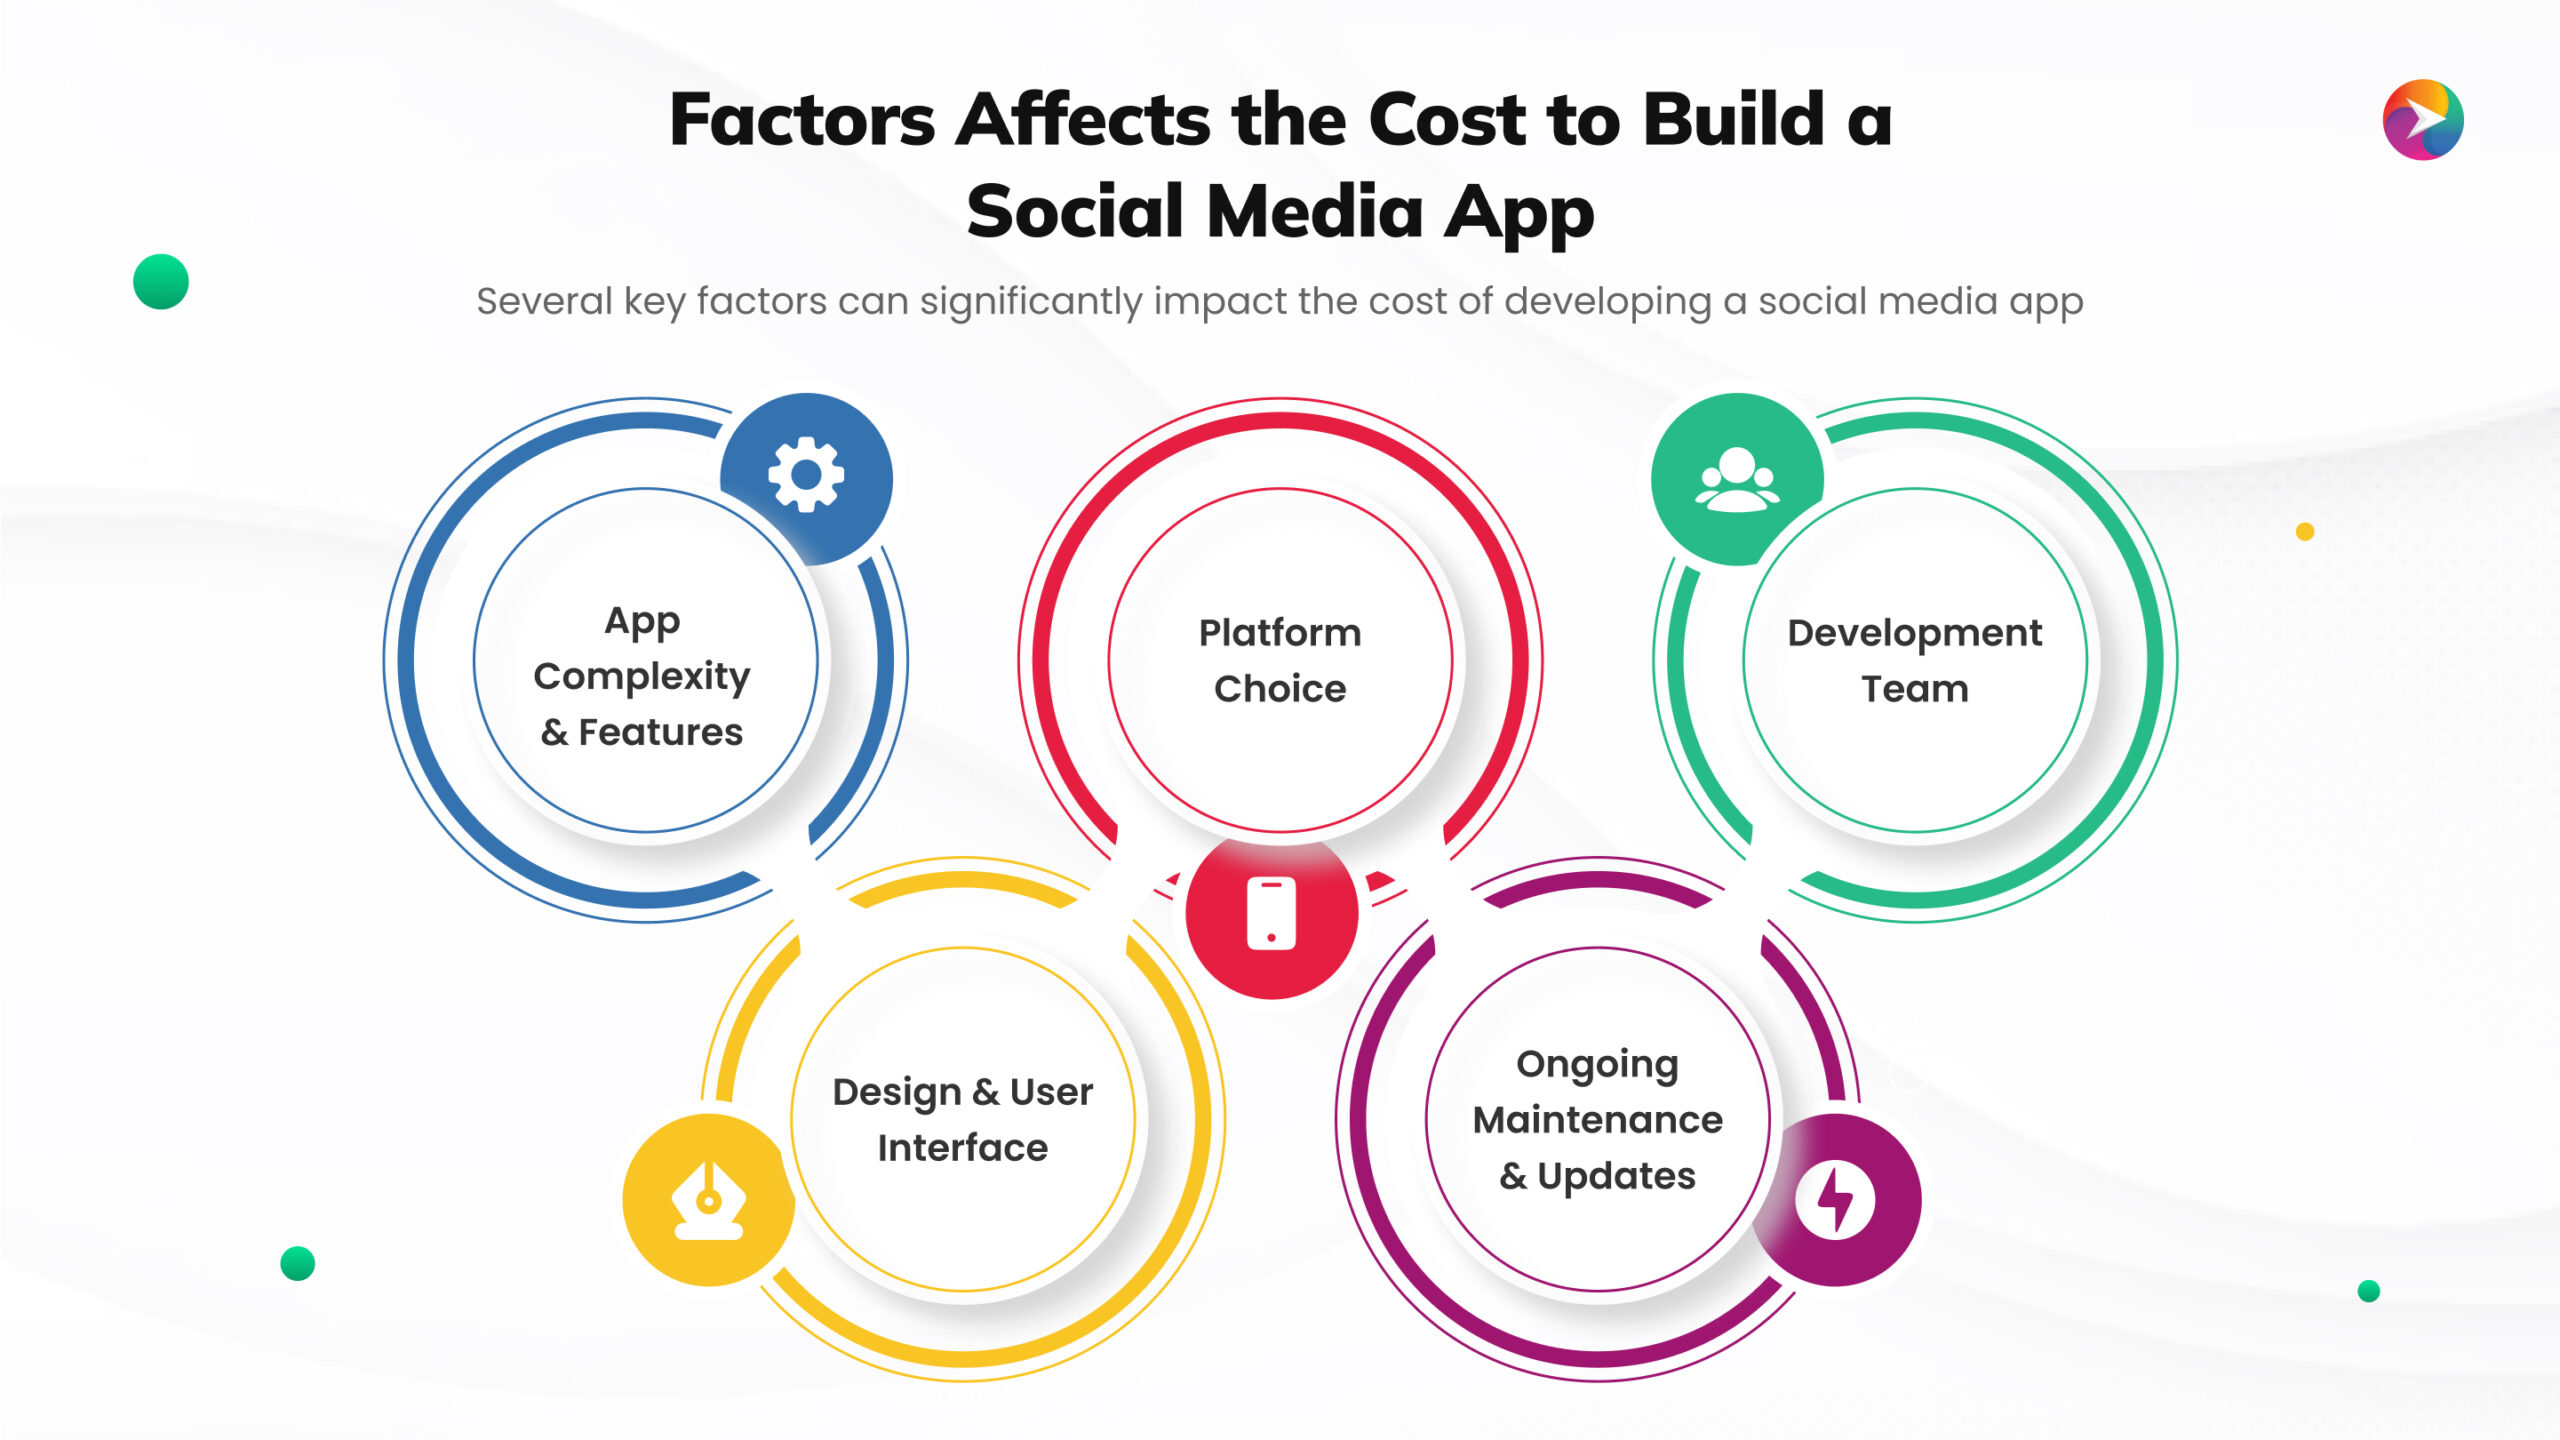 This image explains with the heading "Factors Affecting the Cost to Build a Social Media App" on the top and five circles contain factors like "App Complexity, Platform choice, Development Team, Design & UI and ongoing Maintenance & Updates" on the bottom. 